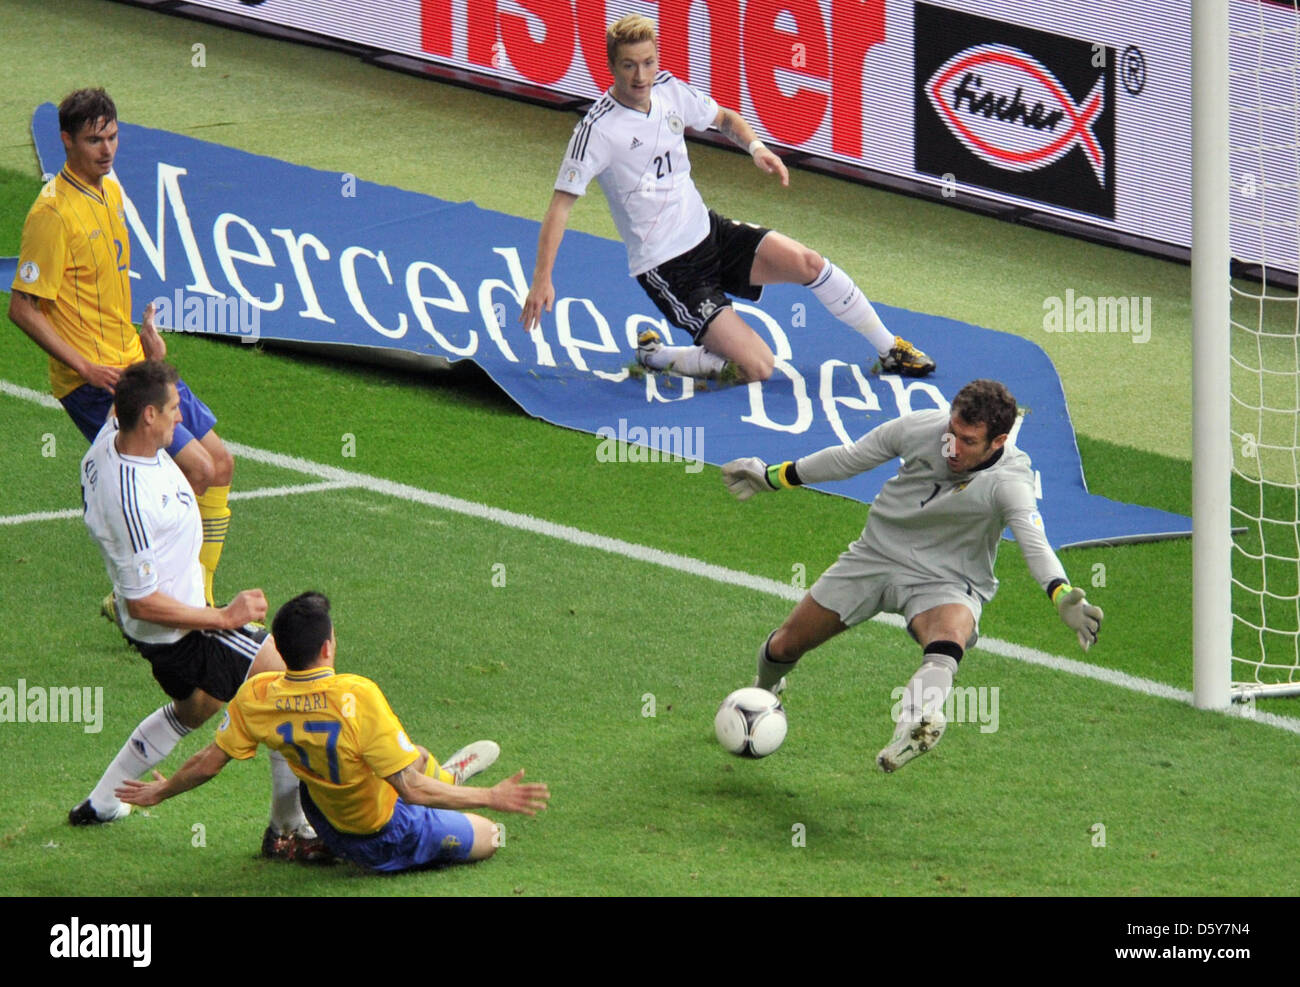 Germany's Miroslav Klose (L) slam the ball into the net to the second goal 2-0 during the FIFA World Cup 2014 qualifying soccer match between Germany and Sweden at Olympic stadium in Berlin, Germany, 16 October 2012. Swedish soccer (L-R) Mikael Lustig, keeper Andreas Isaksson and Behrang Safari and Germany's Marco Reus (C) watch the scene. Photo: Michael Kappeler/dpa  +++(c) dpa -  Stock Photo